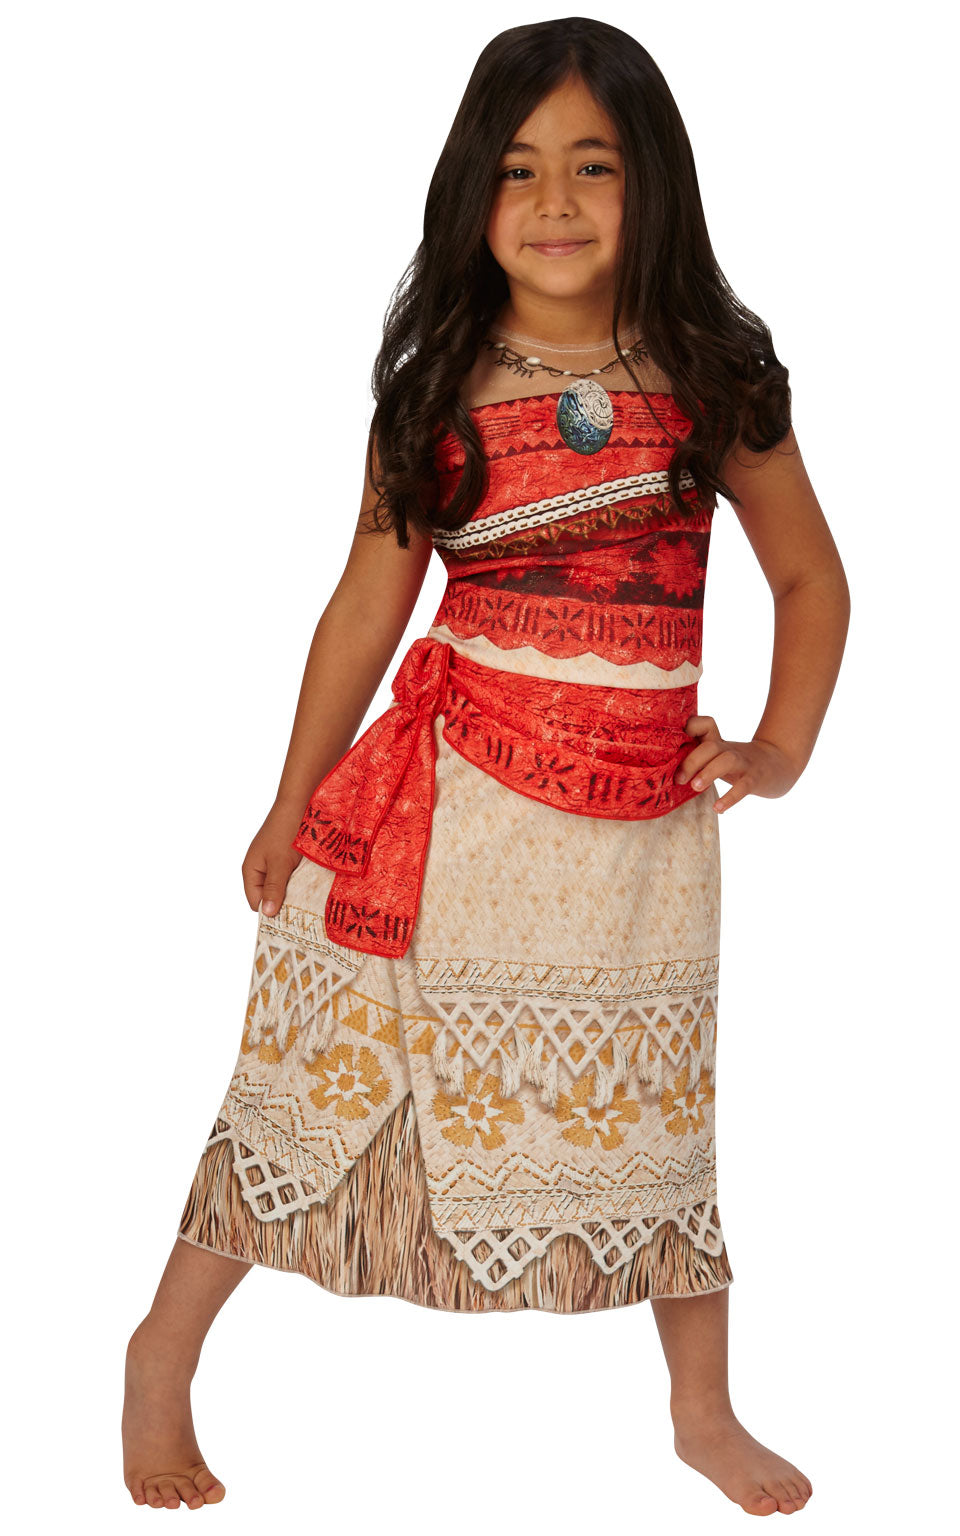 This child's Classic Moana Costume features a front-printed dress with printed necklace and attached sash.